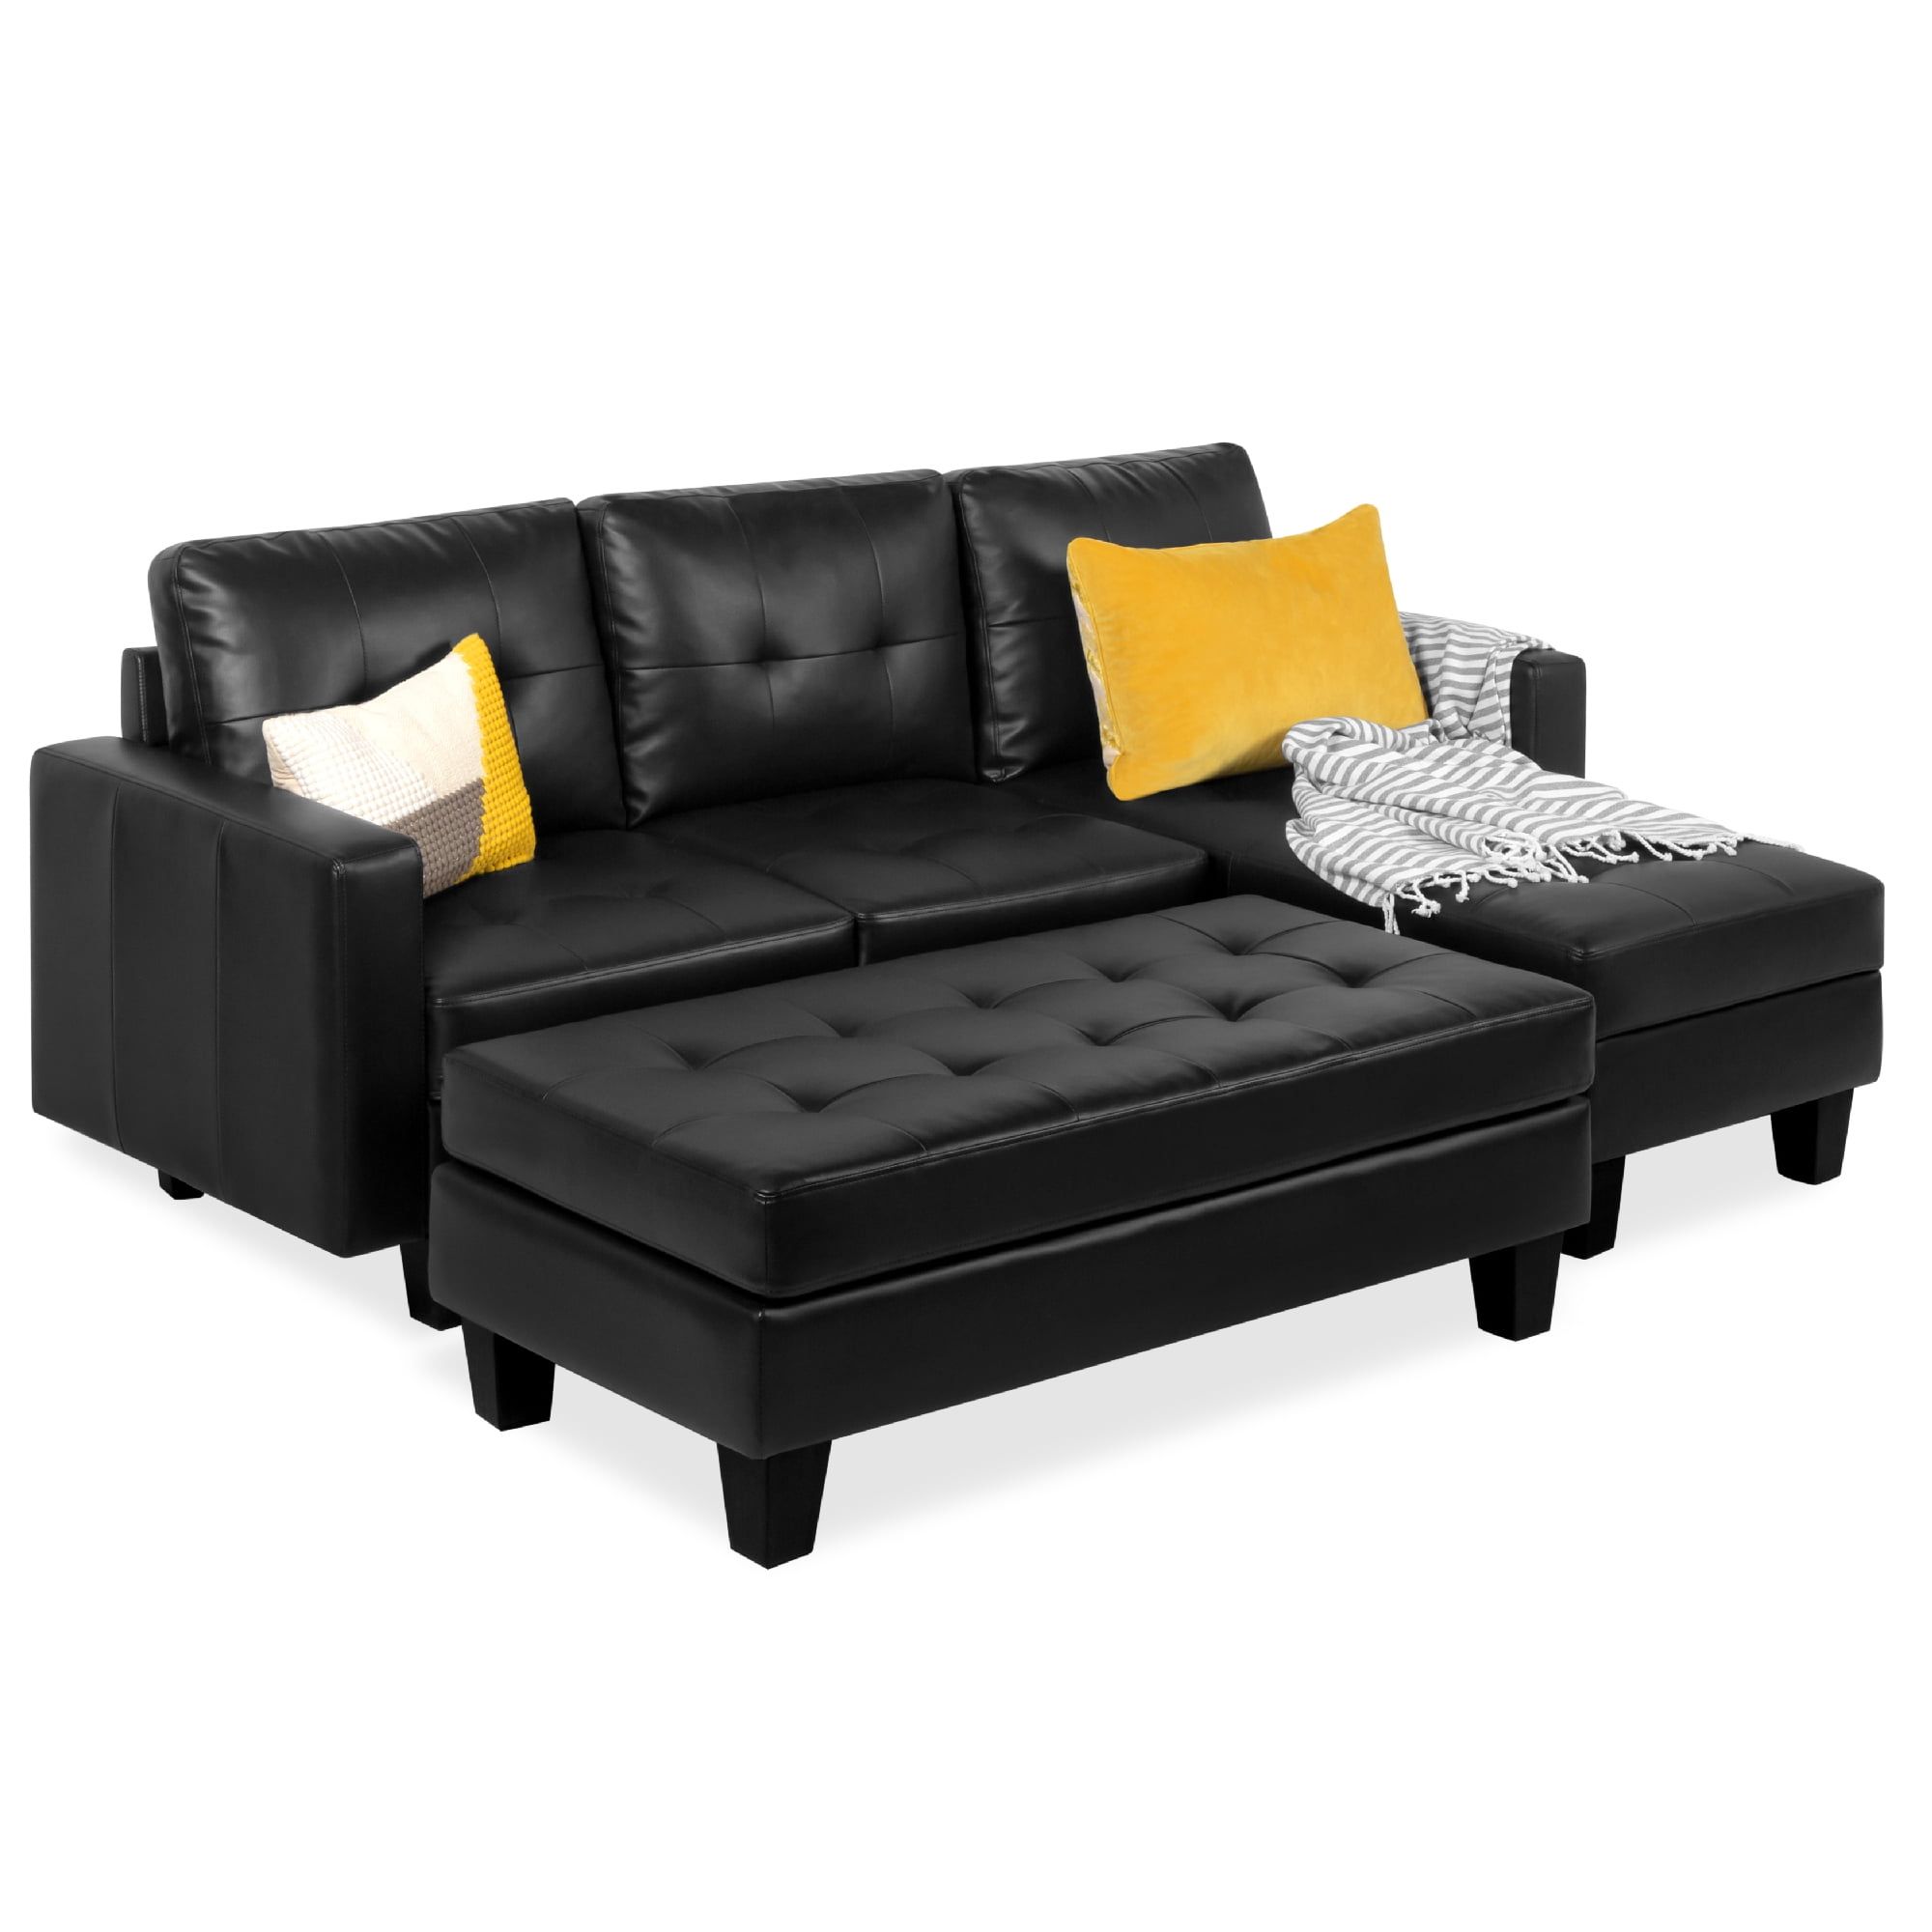 Best Choice Products 3 Seat L Shape Tufted Faux Leather Sectional Sofa Couch  Set W/ Chaise Lounge, Ottoman Bench – Black – Walmart Inside 3 Seat L Shaped Sofas In Black (Photo 2 of 15)